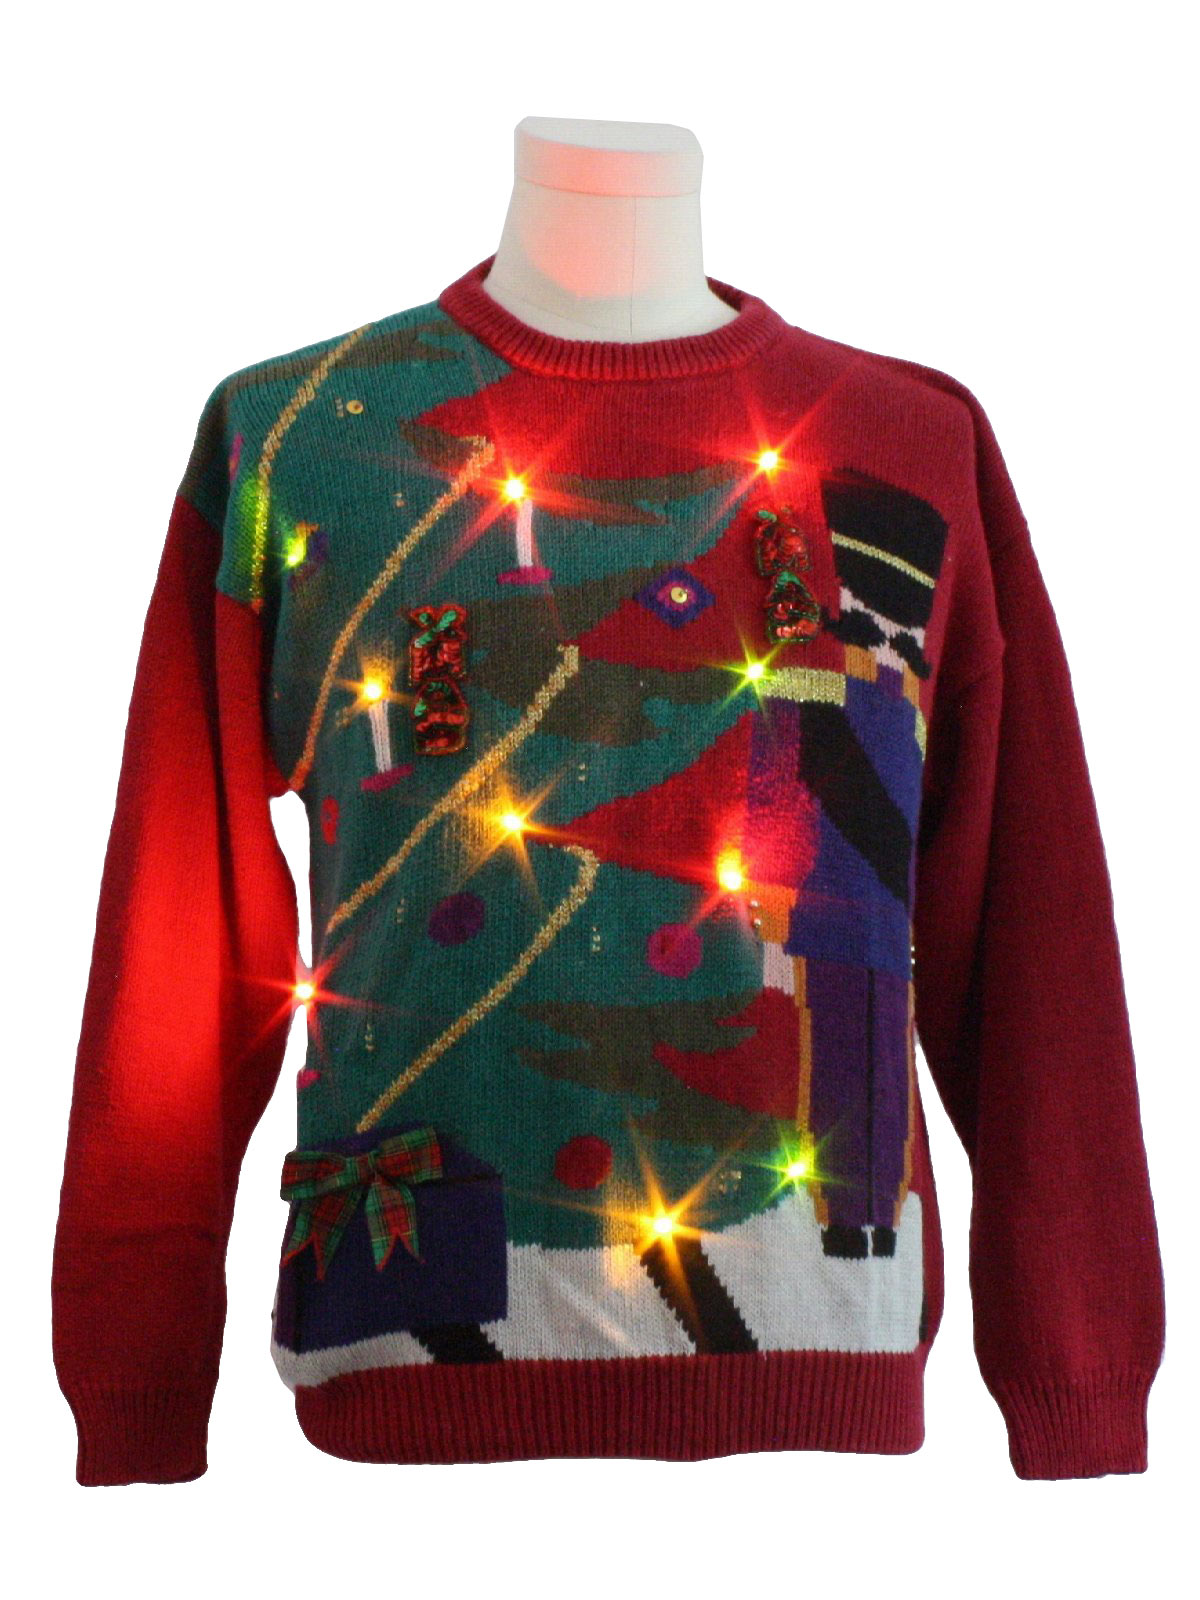 Lightup Ugly Christmas Sweater : -Holiday Traditions - Unisex Red ...